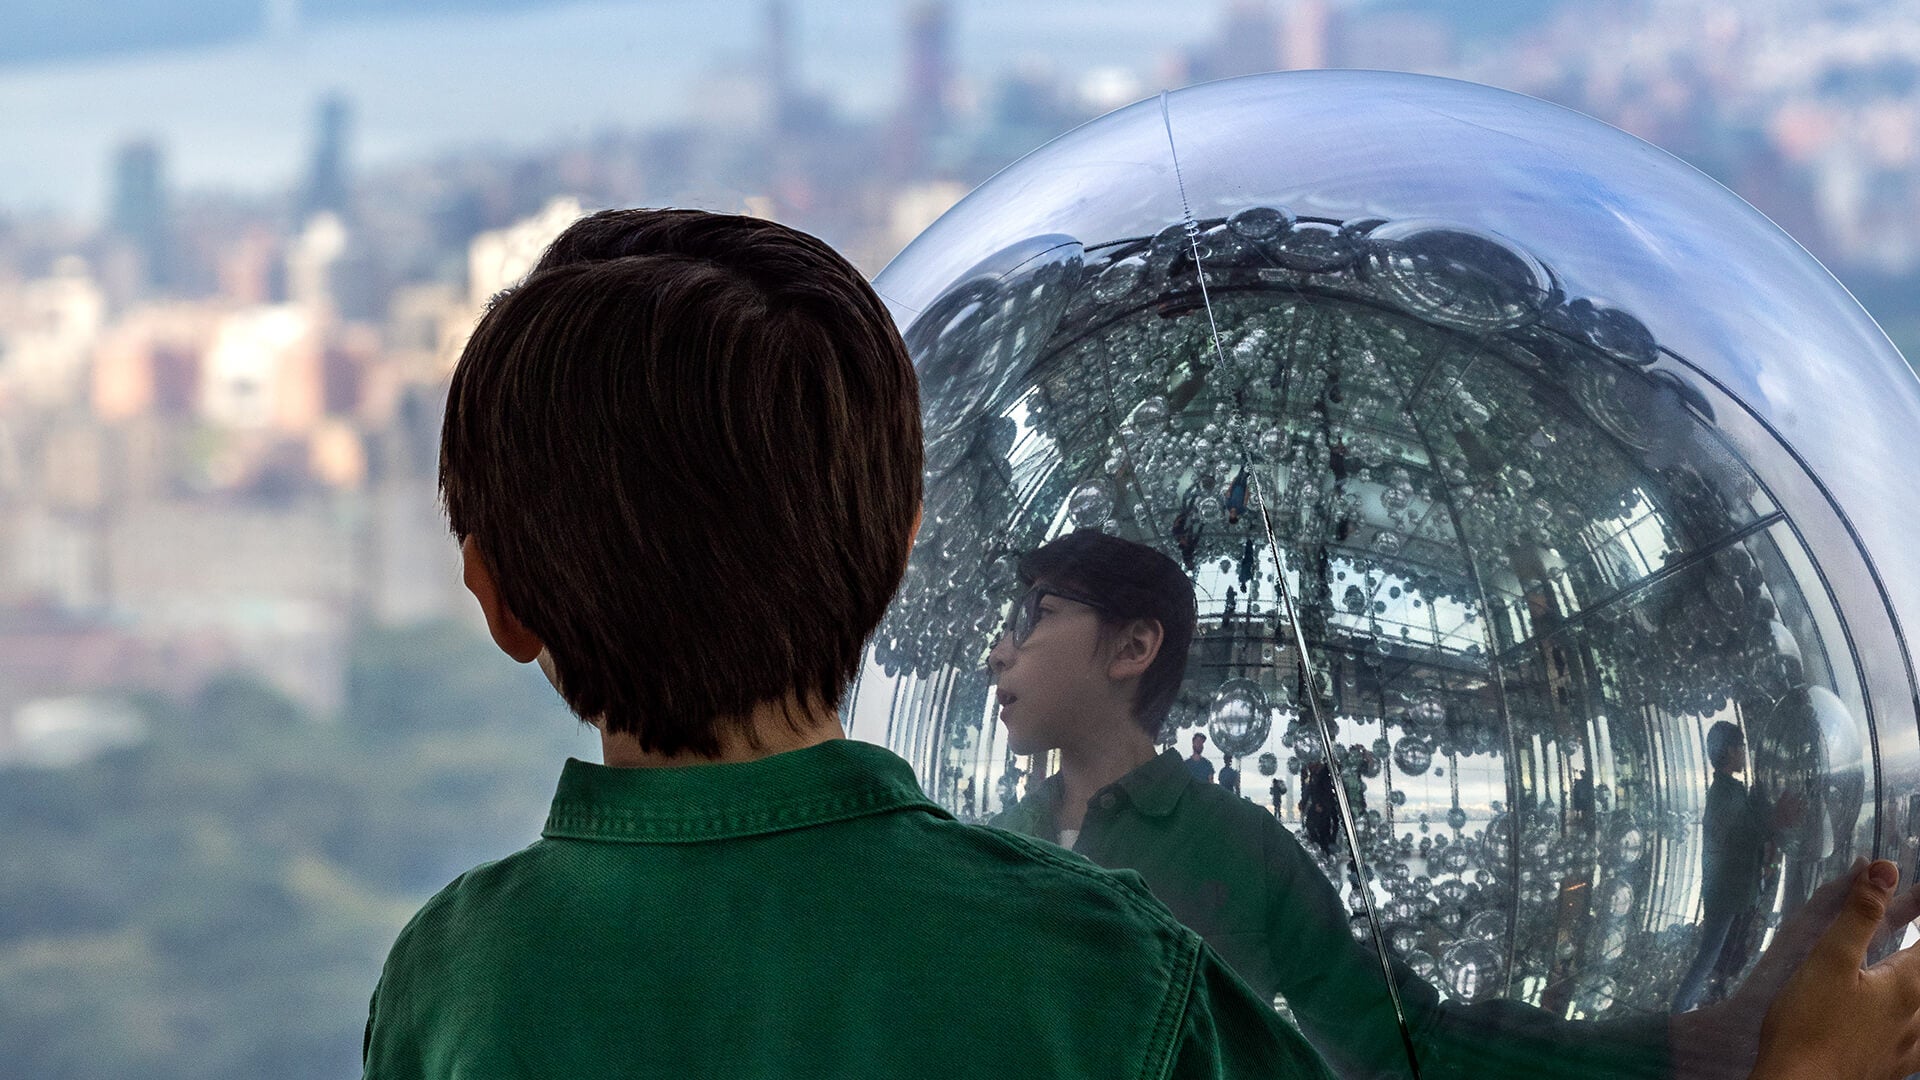 Young person in green shirt gazing into a large mirror ball, reflecting the New York City skyline in the background.